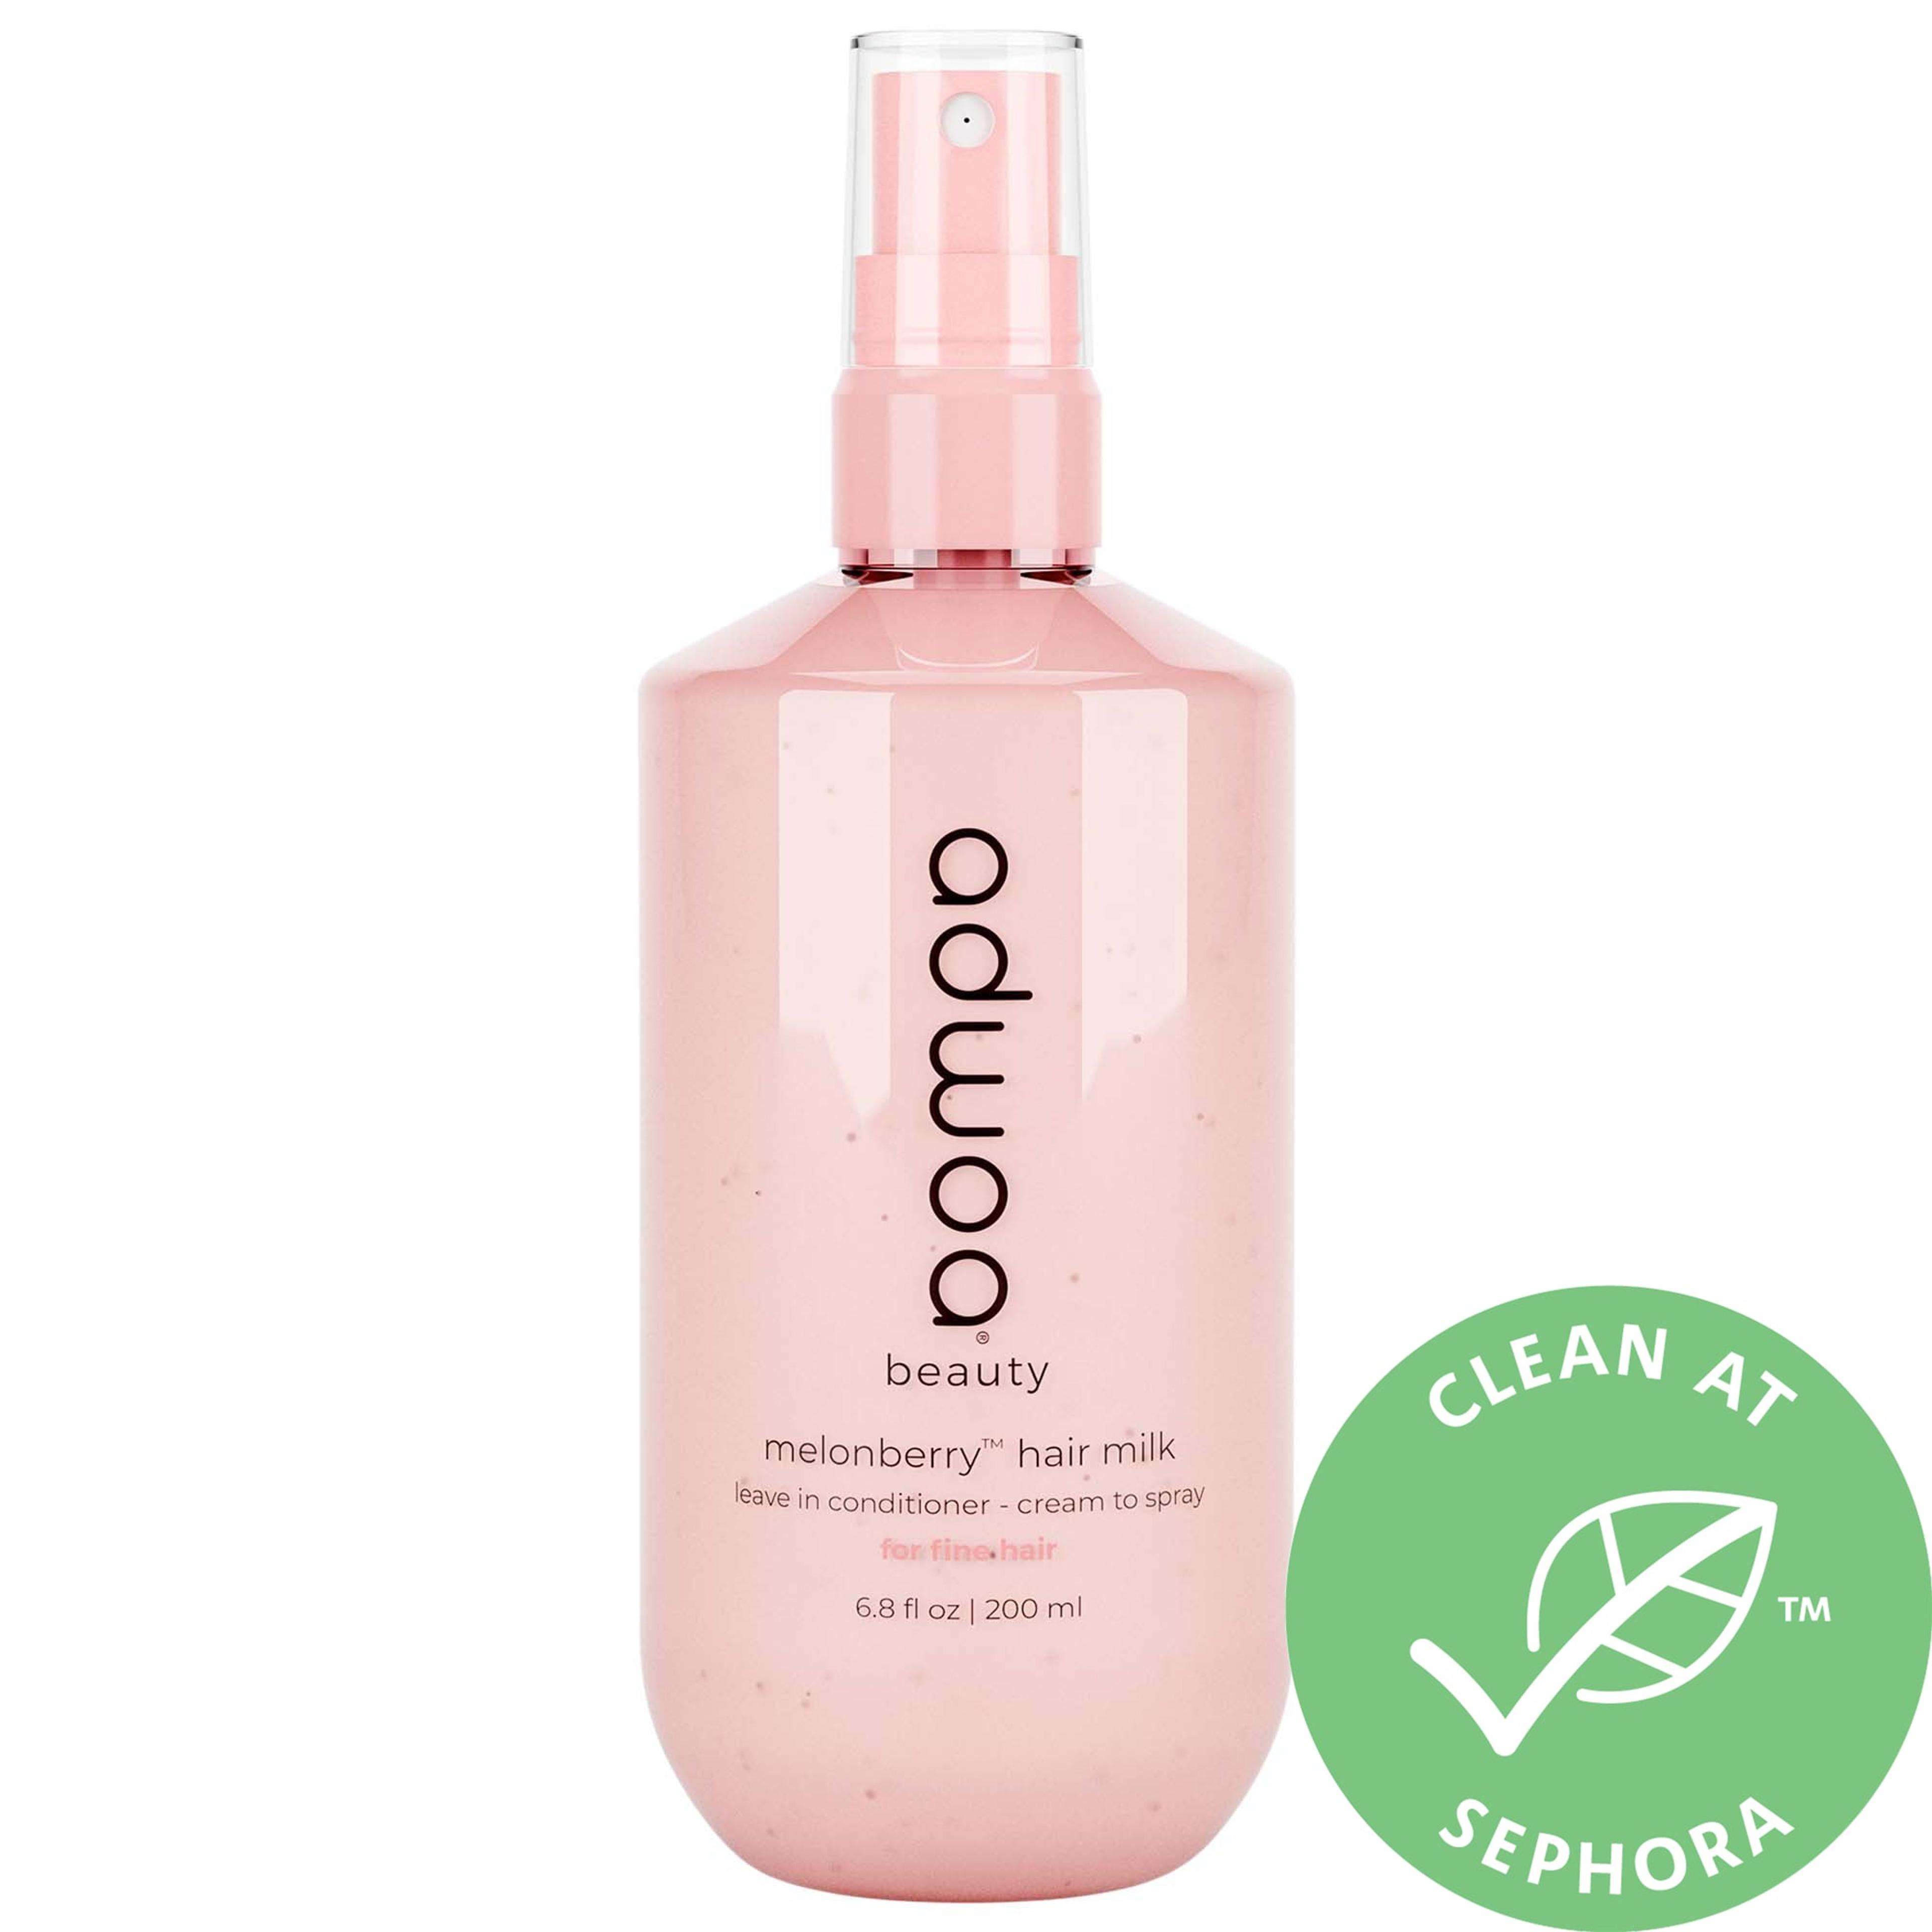 Melonberry Hair Milk Leave-In Conditioner - adwoa beauty